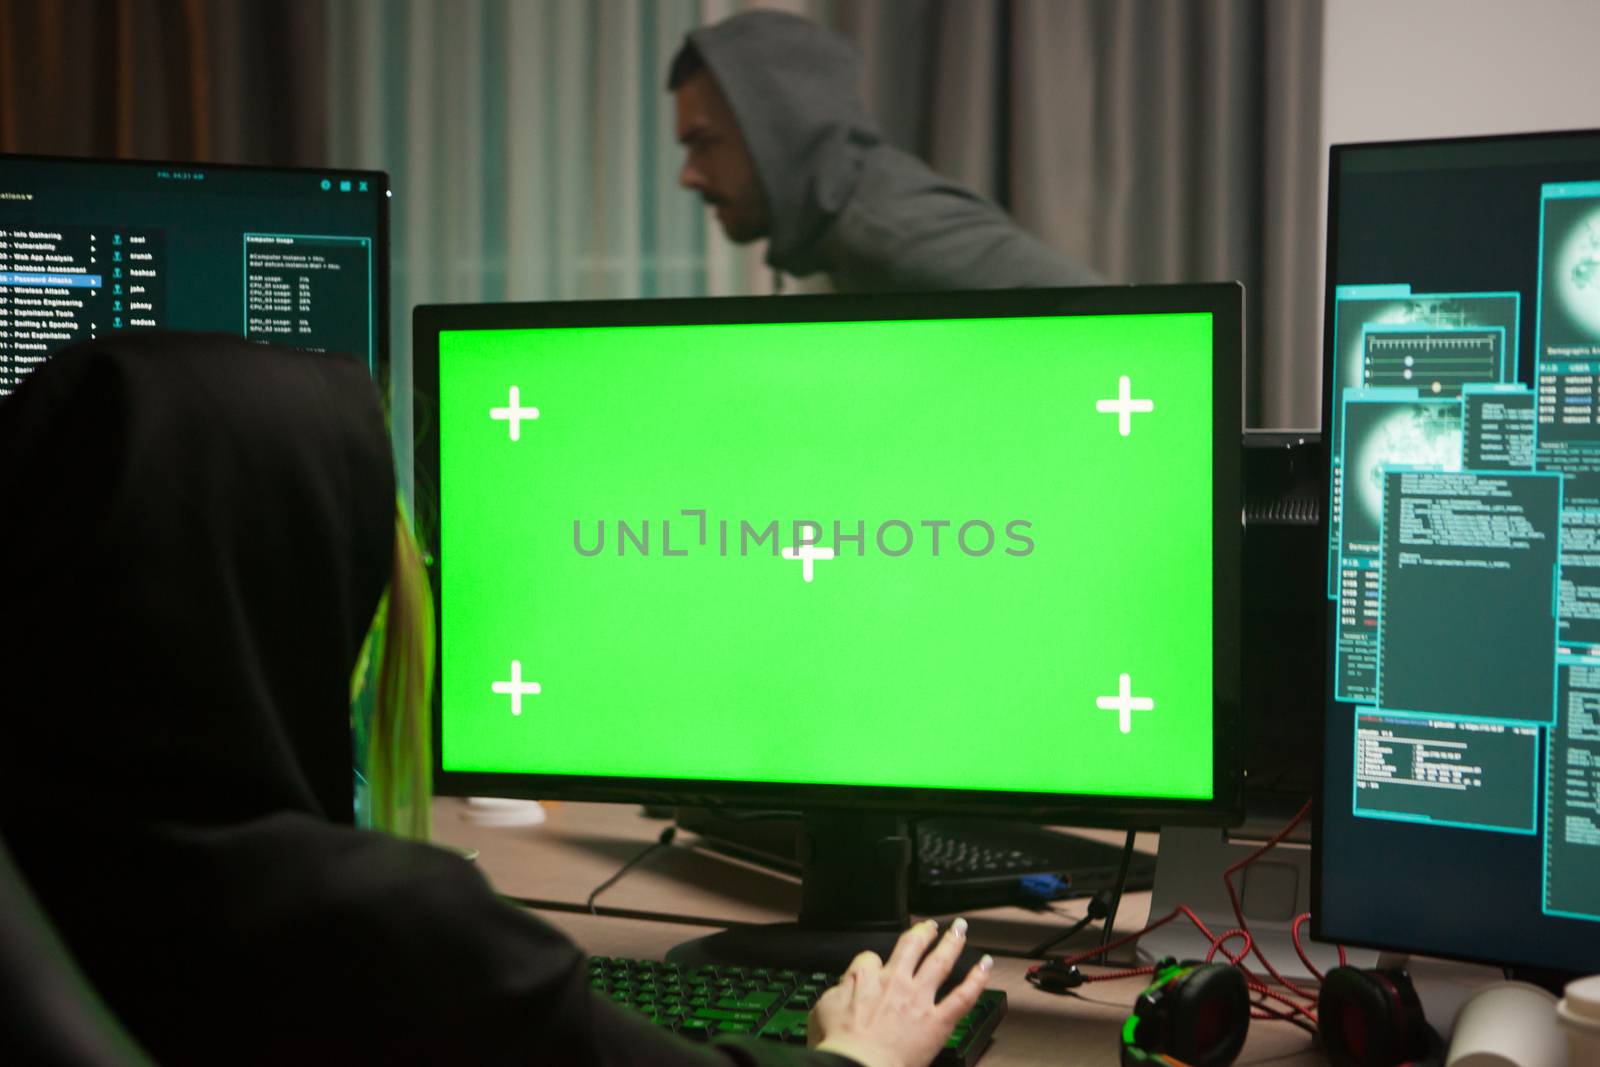 Organised female hacker in front of computer with green screen.